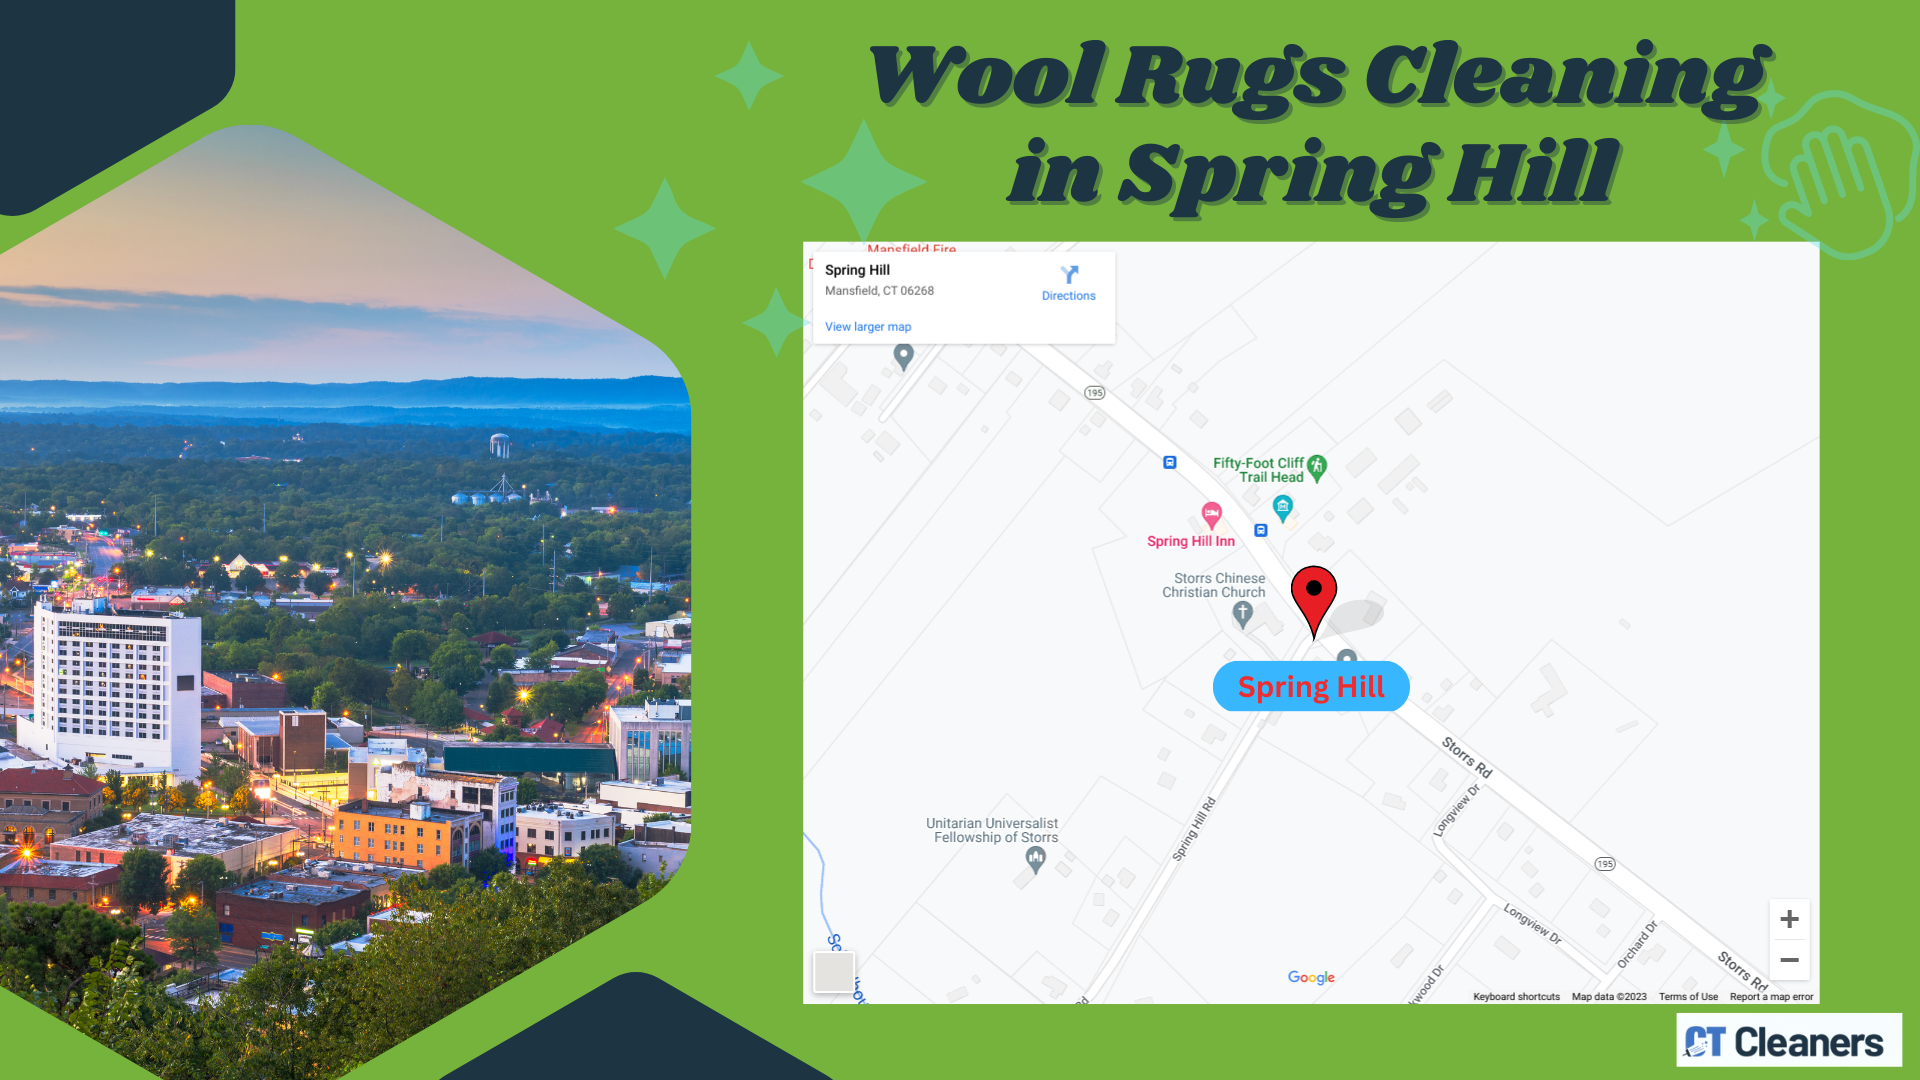 Wool Rugs Cleaning in Spring Hill Map